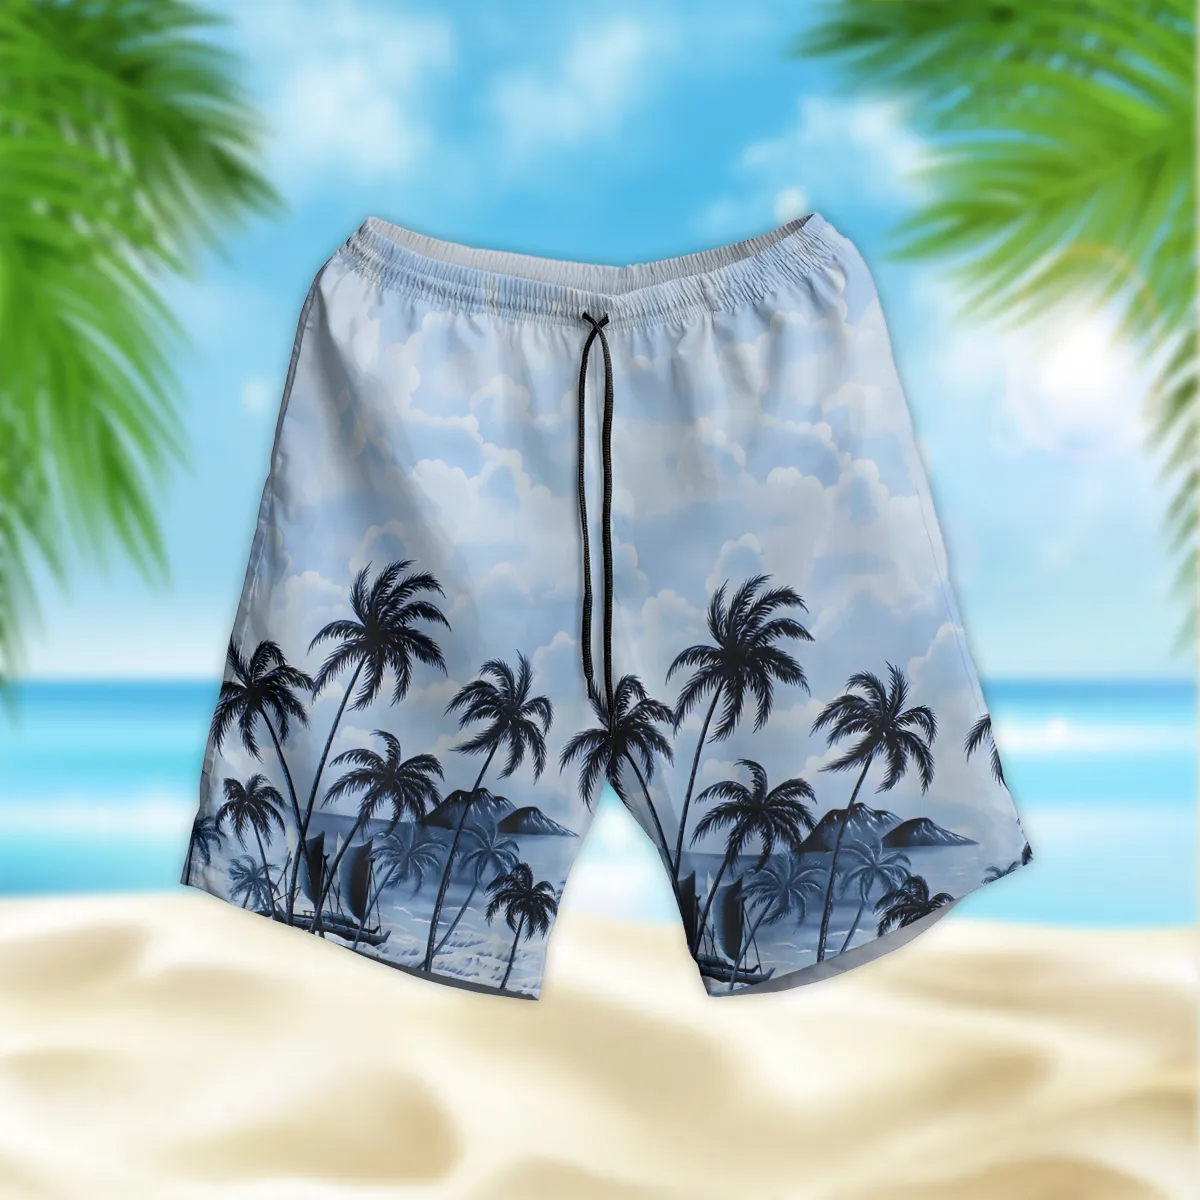 CH-46 Sea Knight Hawaii Style Palm Tree U.S. Marine Corps Beach Short All Over Prints Gift Loves